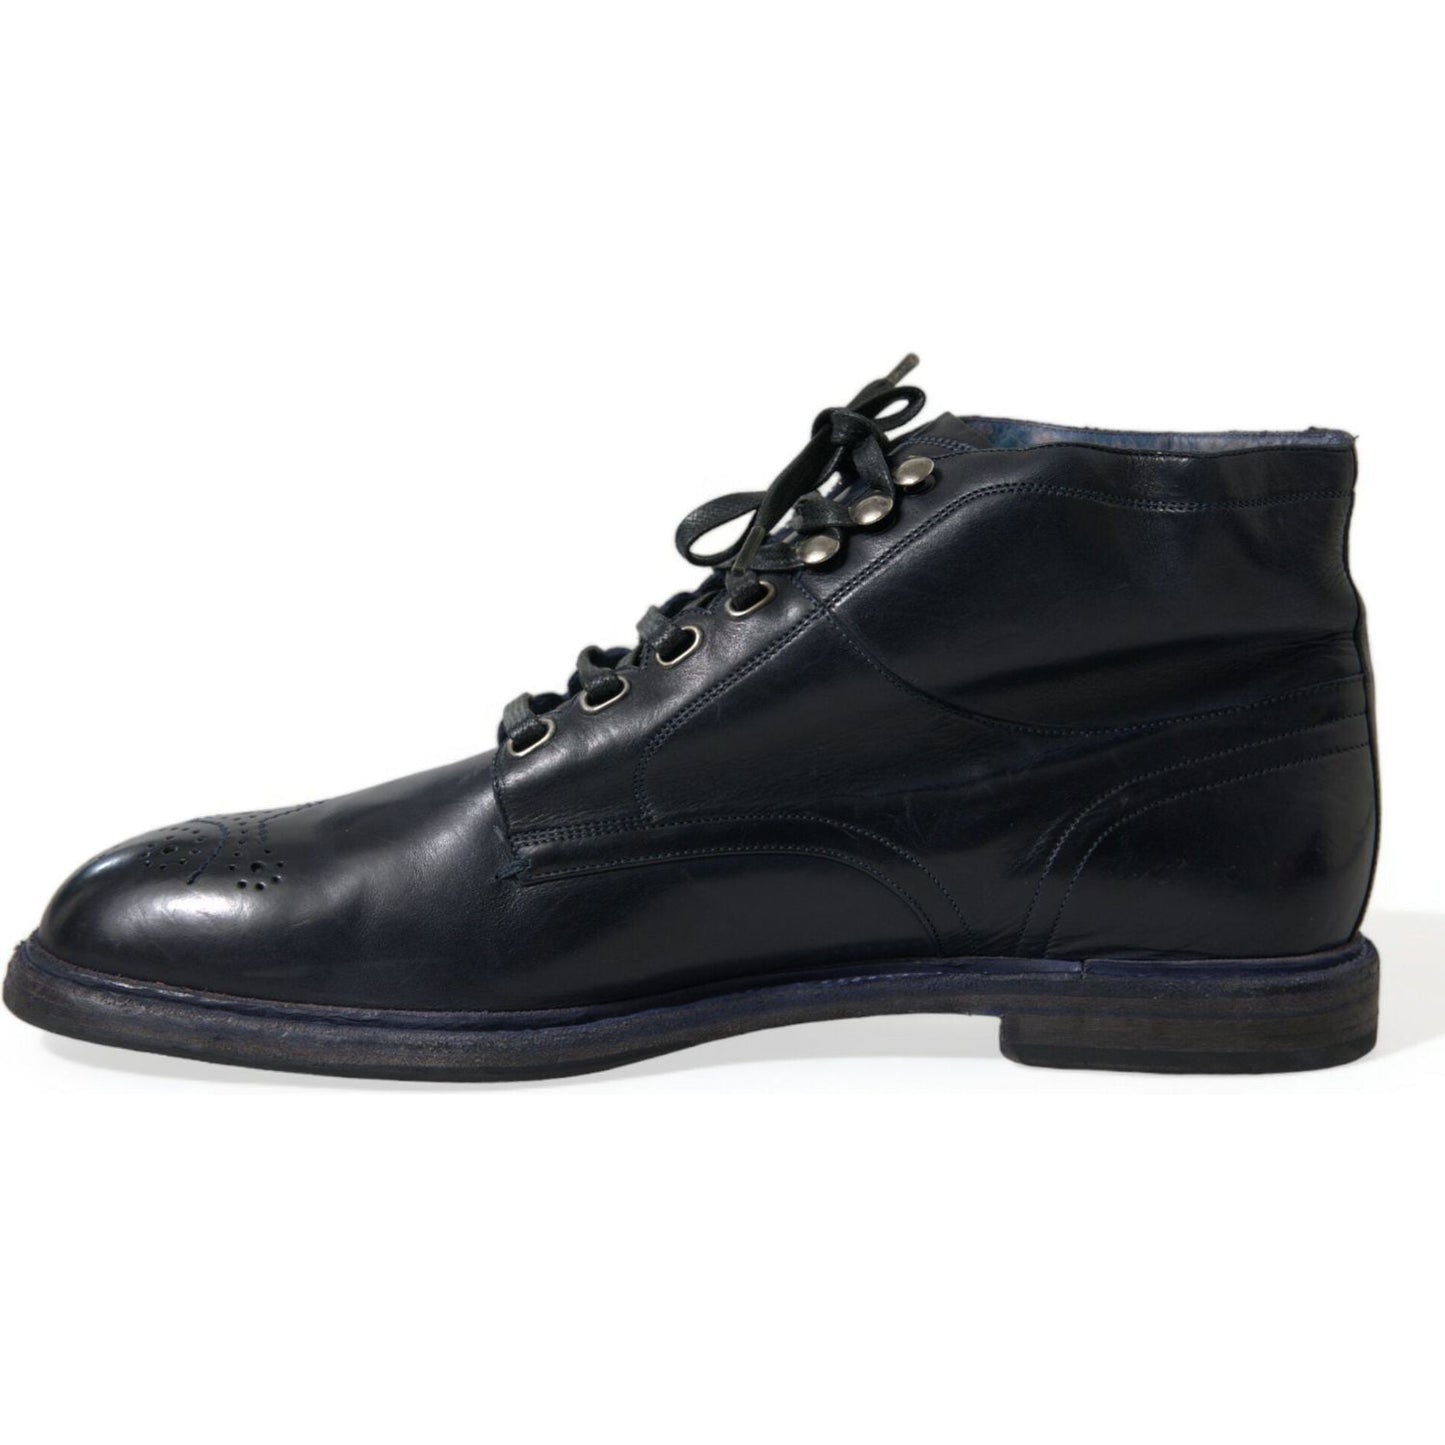 Dolce & Gabbana Navy Blue Leather Ankle Boots navy-blue-leather-ankle-boots